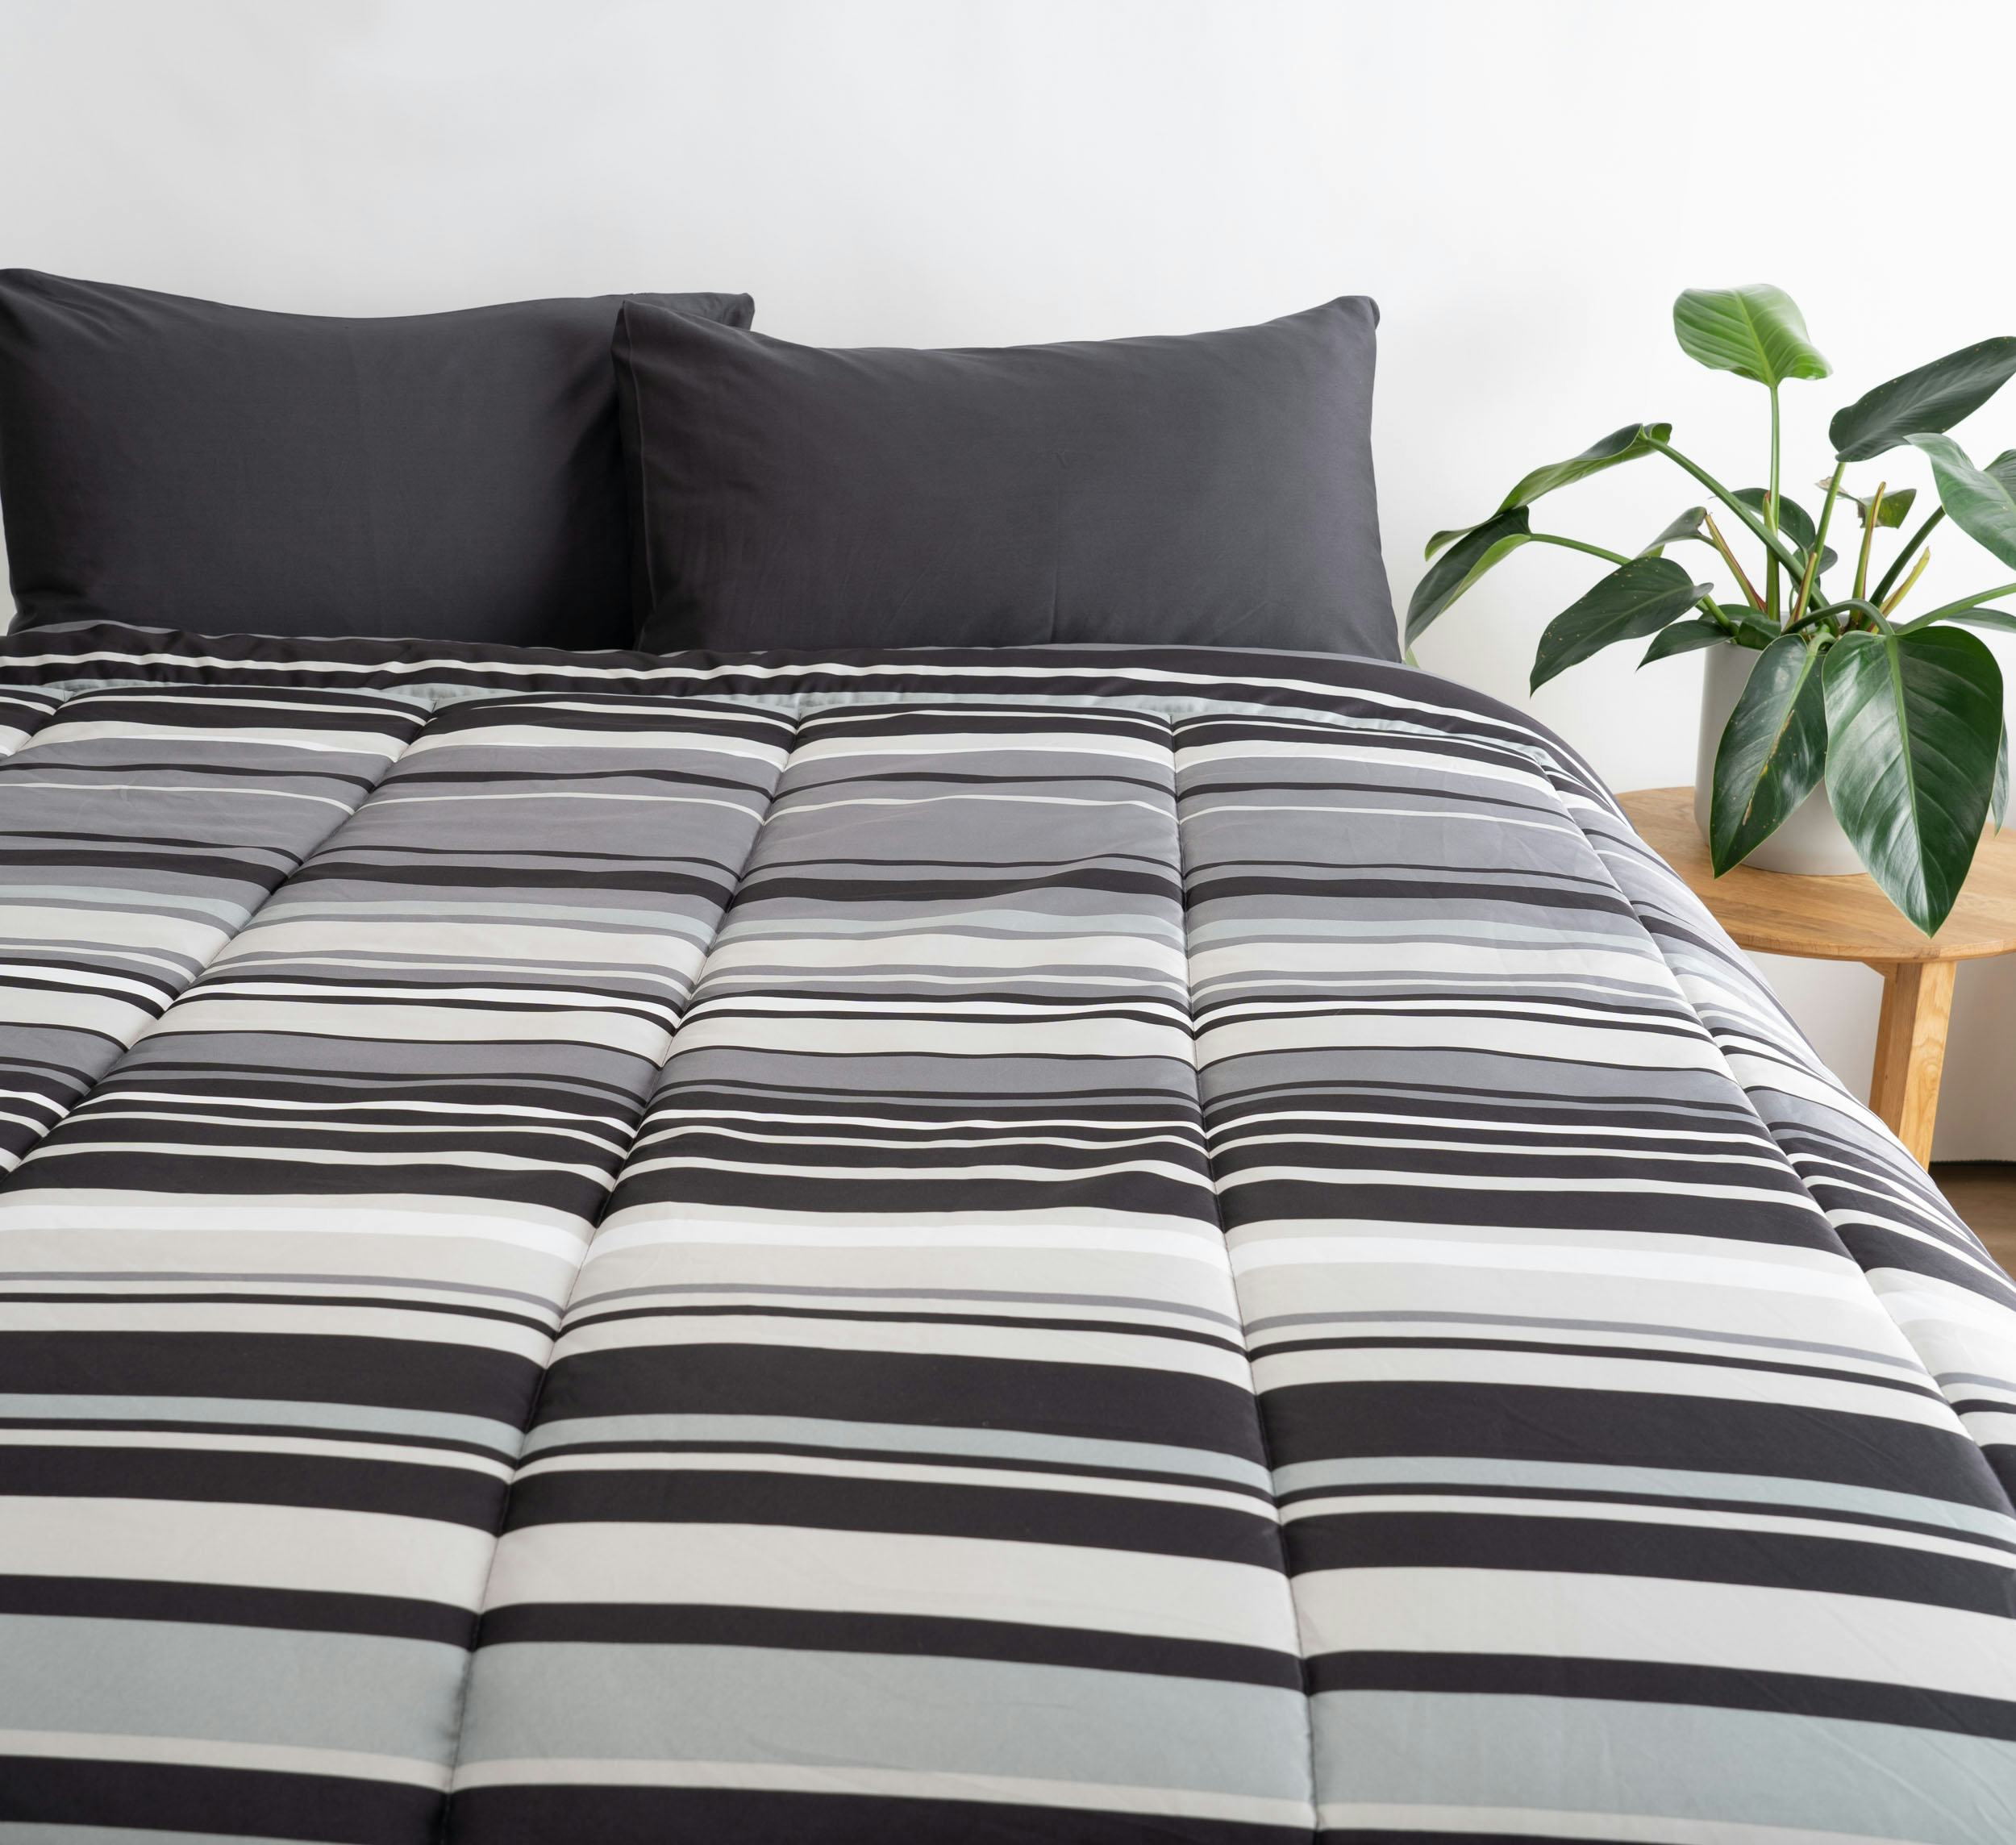 Stripy sheets on a bed